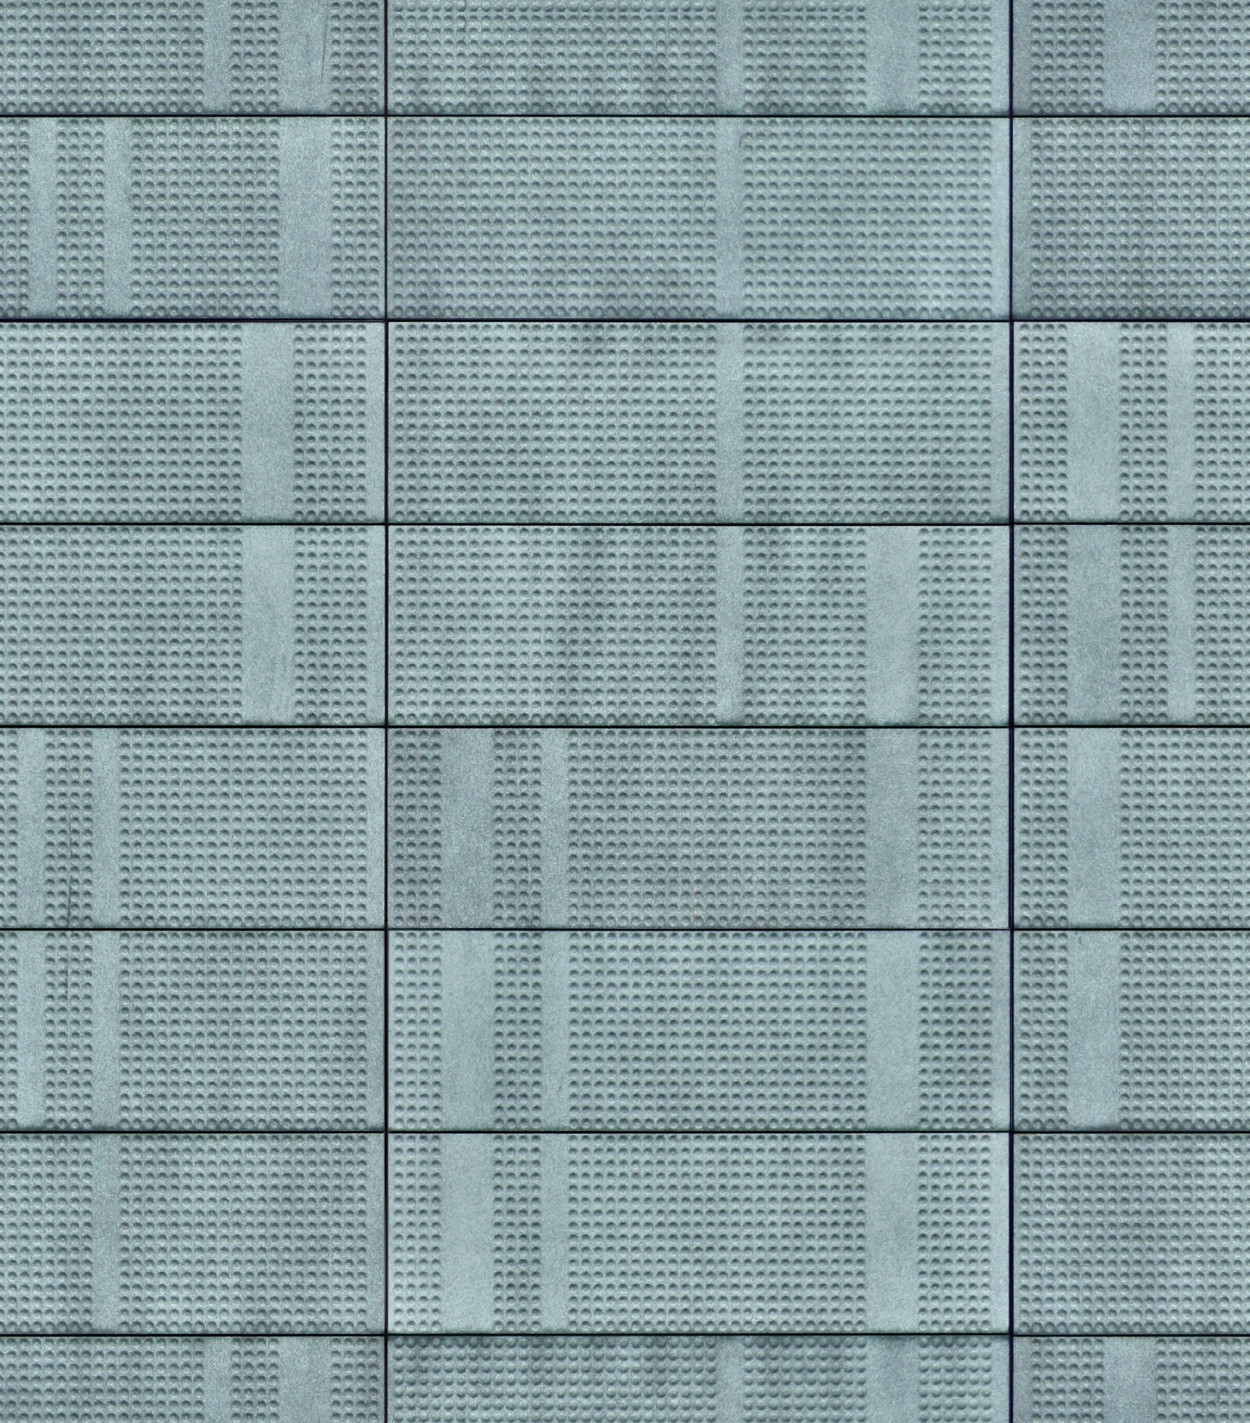 A seamless patterned copper panels texture for use in architectural drawings and 3D models